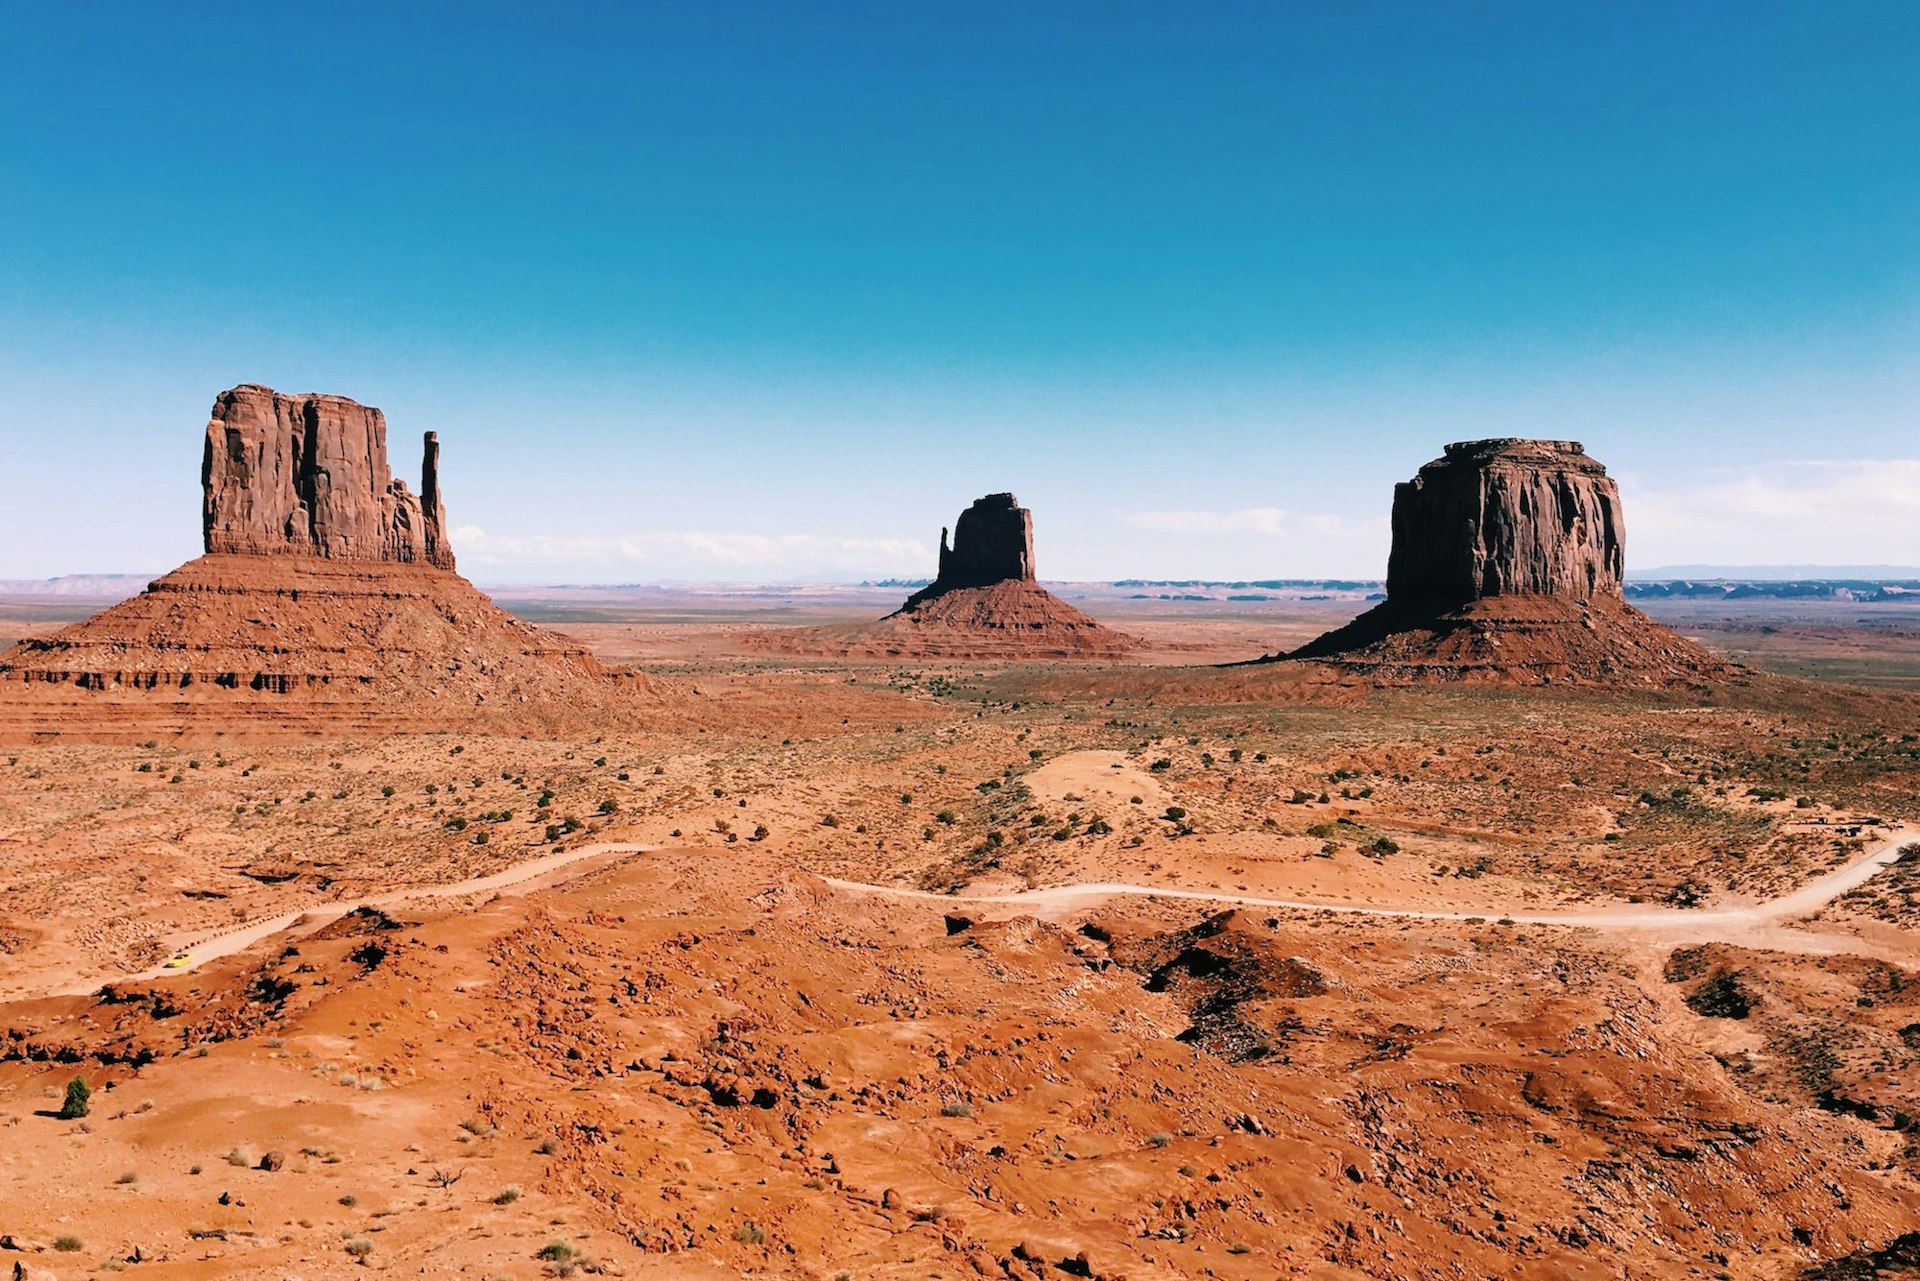 The Travel Diary: The enduring beauty of America’s national parks